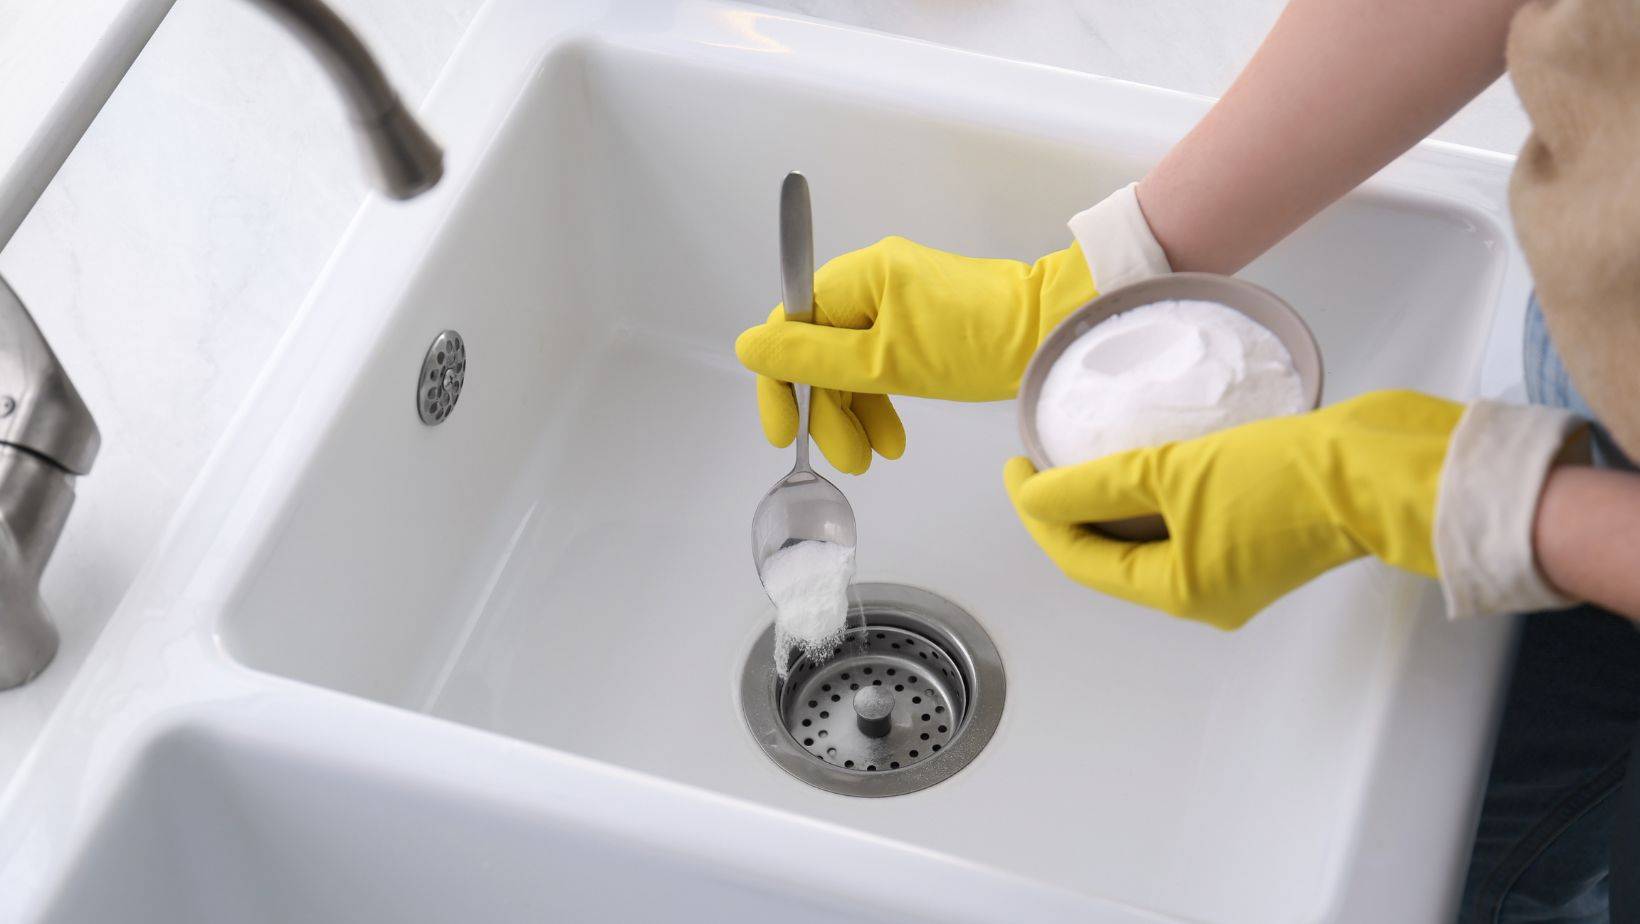 Tips for Safe and Efficient Bathroom Drain Cleaning